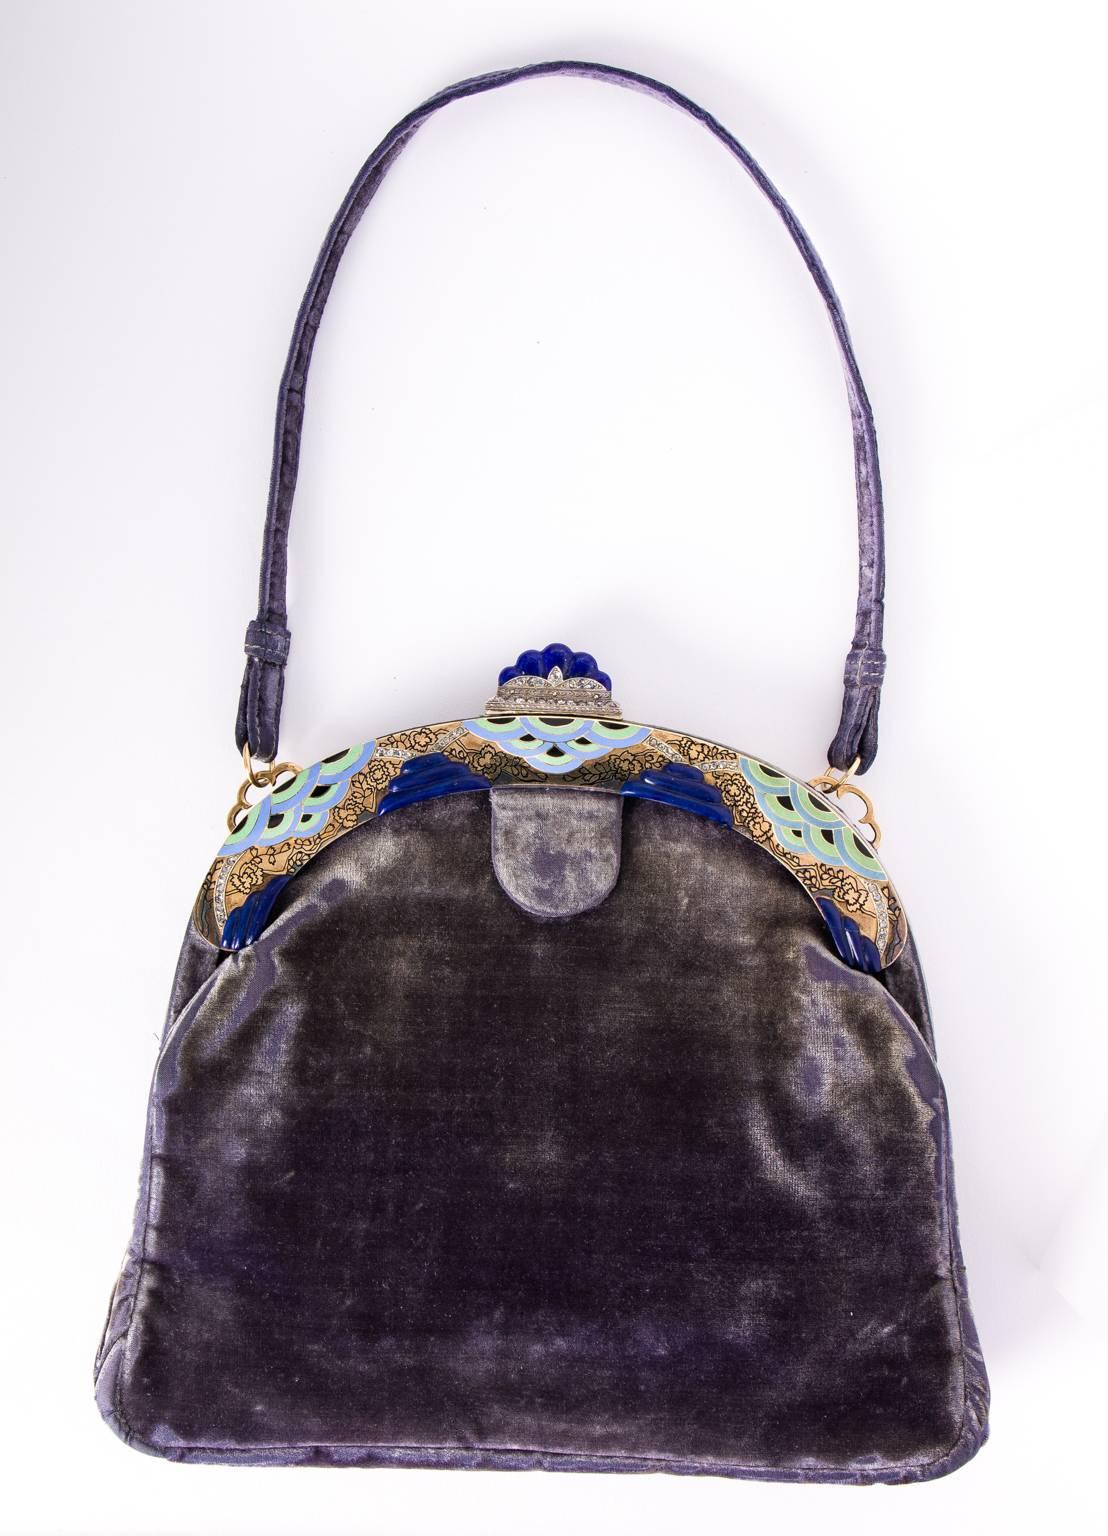  Ca. 1920's French Art Deco purple velvet evening bag. 14K gold frame embellished with diamonds, carved lapis lazuli clasp and enameled edges in a stylized oriental cloud motif. Very rare piece. 